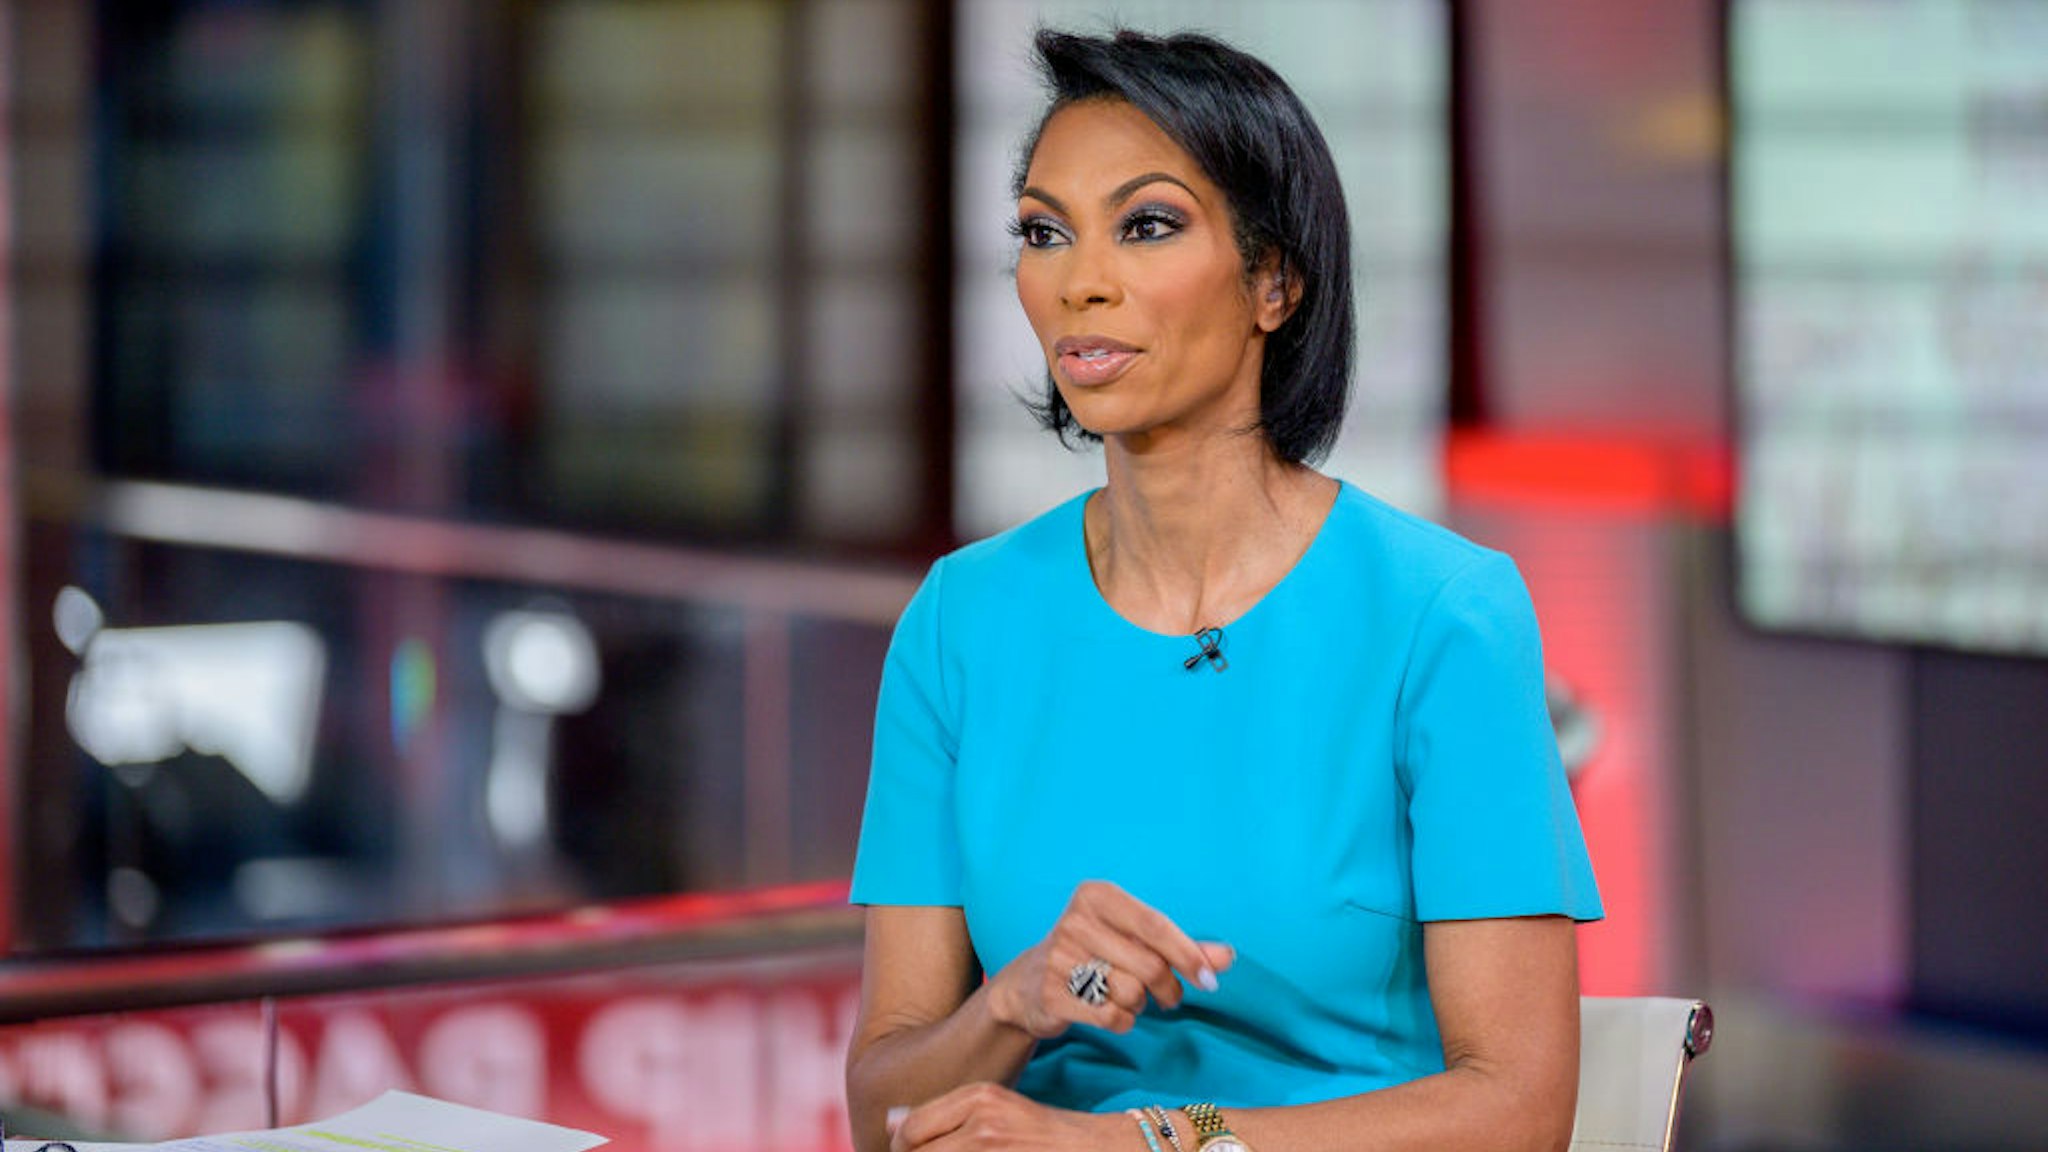 NEW YORK, NEW YORK - MARCH 09: Harris Faulkner as Dr. Oz visits "Outnumbered Overtime" at Fox News Channel Studios on March 09, 2020 in New York City. (Photo by Roy Rochlin/Getty Images)